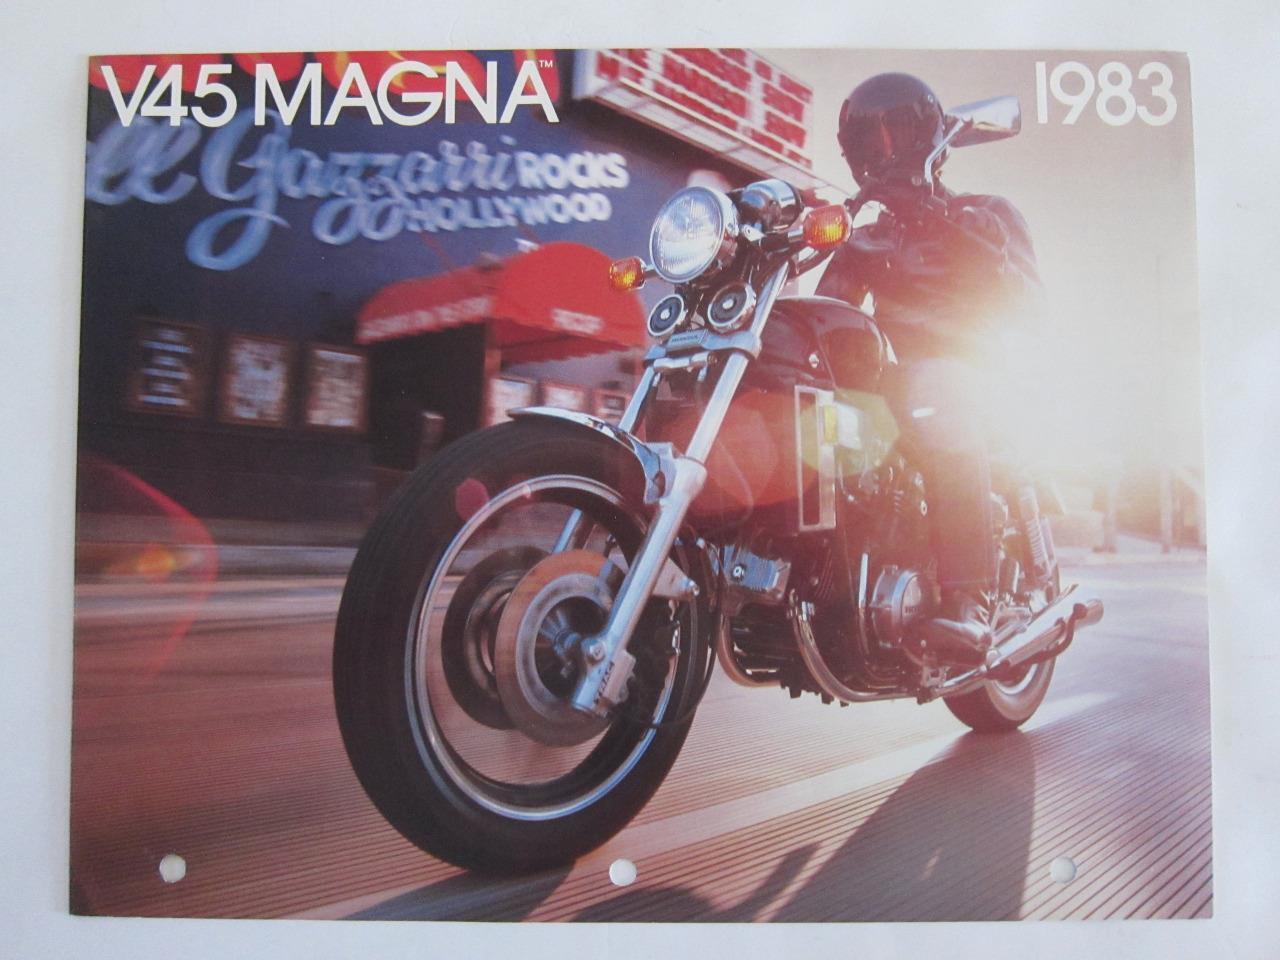 HONDA motorcycle brochure V 45 MAGNA Uncirculated high quality color pictures\'83